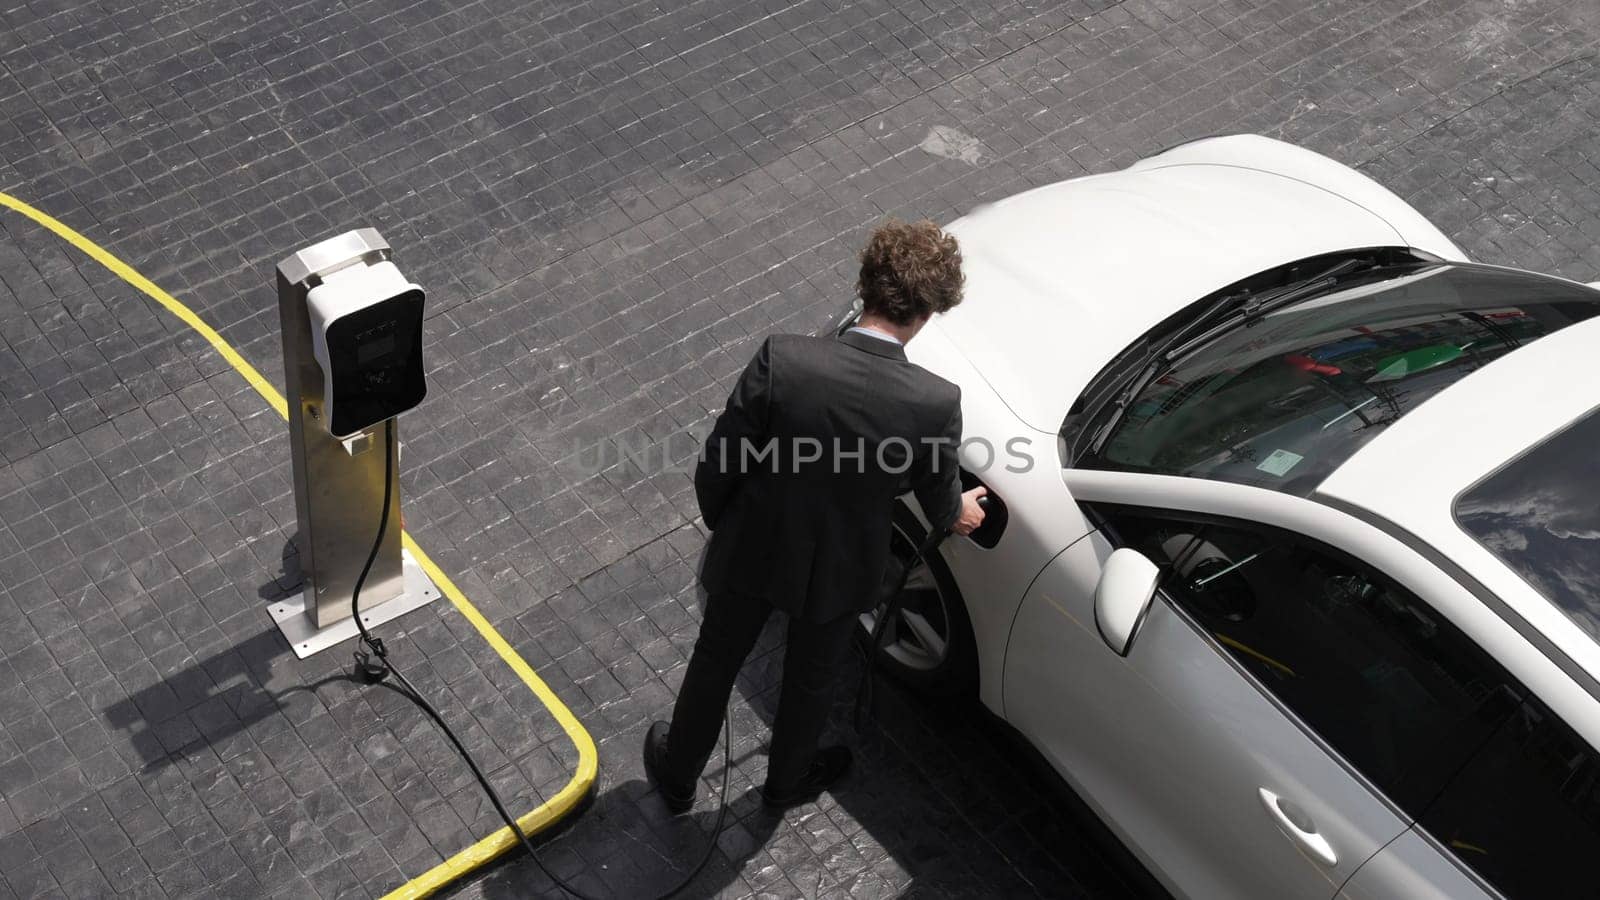 Progressive businessman unplugs charger plug from charging station to his electric car before driving around city center. Eco friendly rechargeable car powered by sustainable and clean energy.